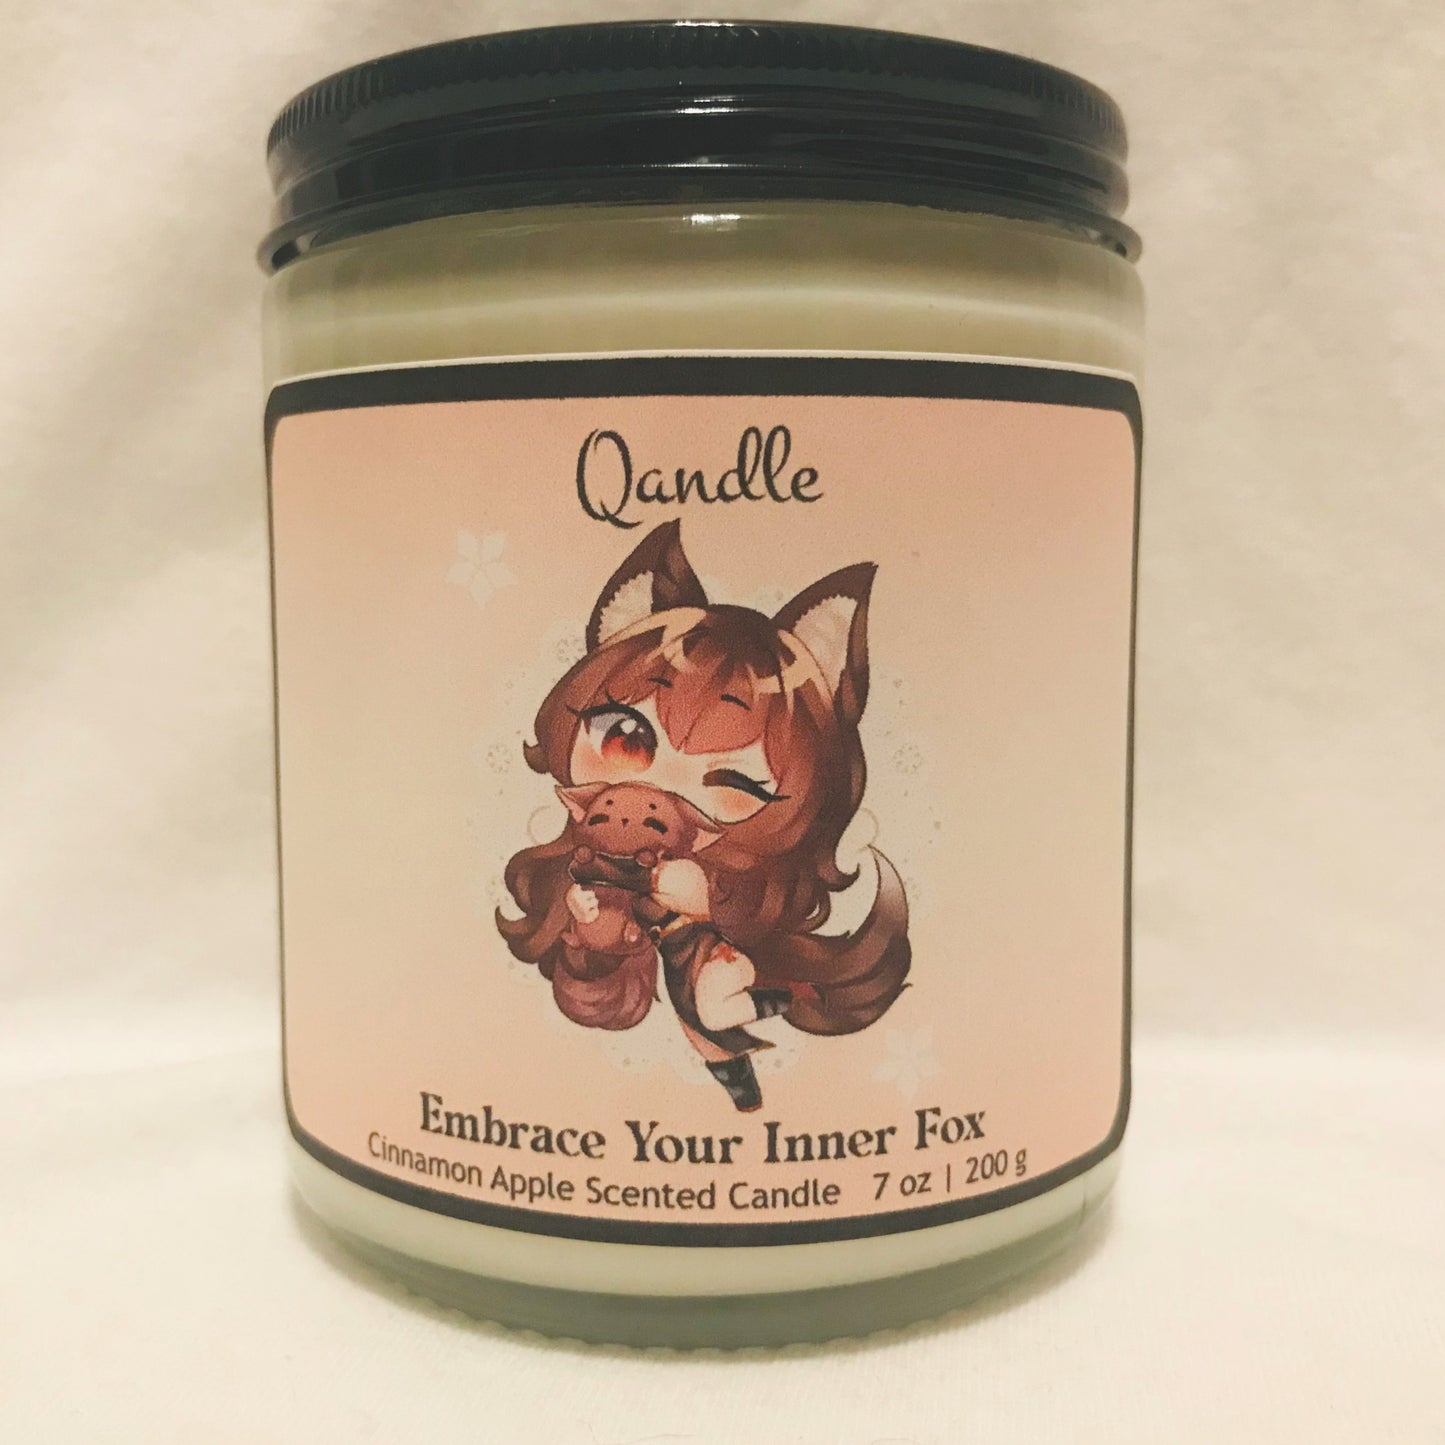 Embrace Your Inner Fox Candle